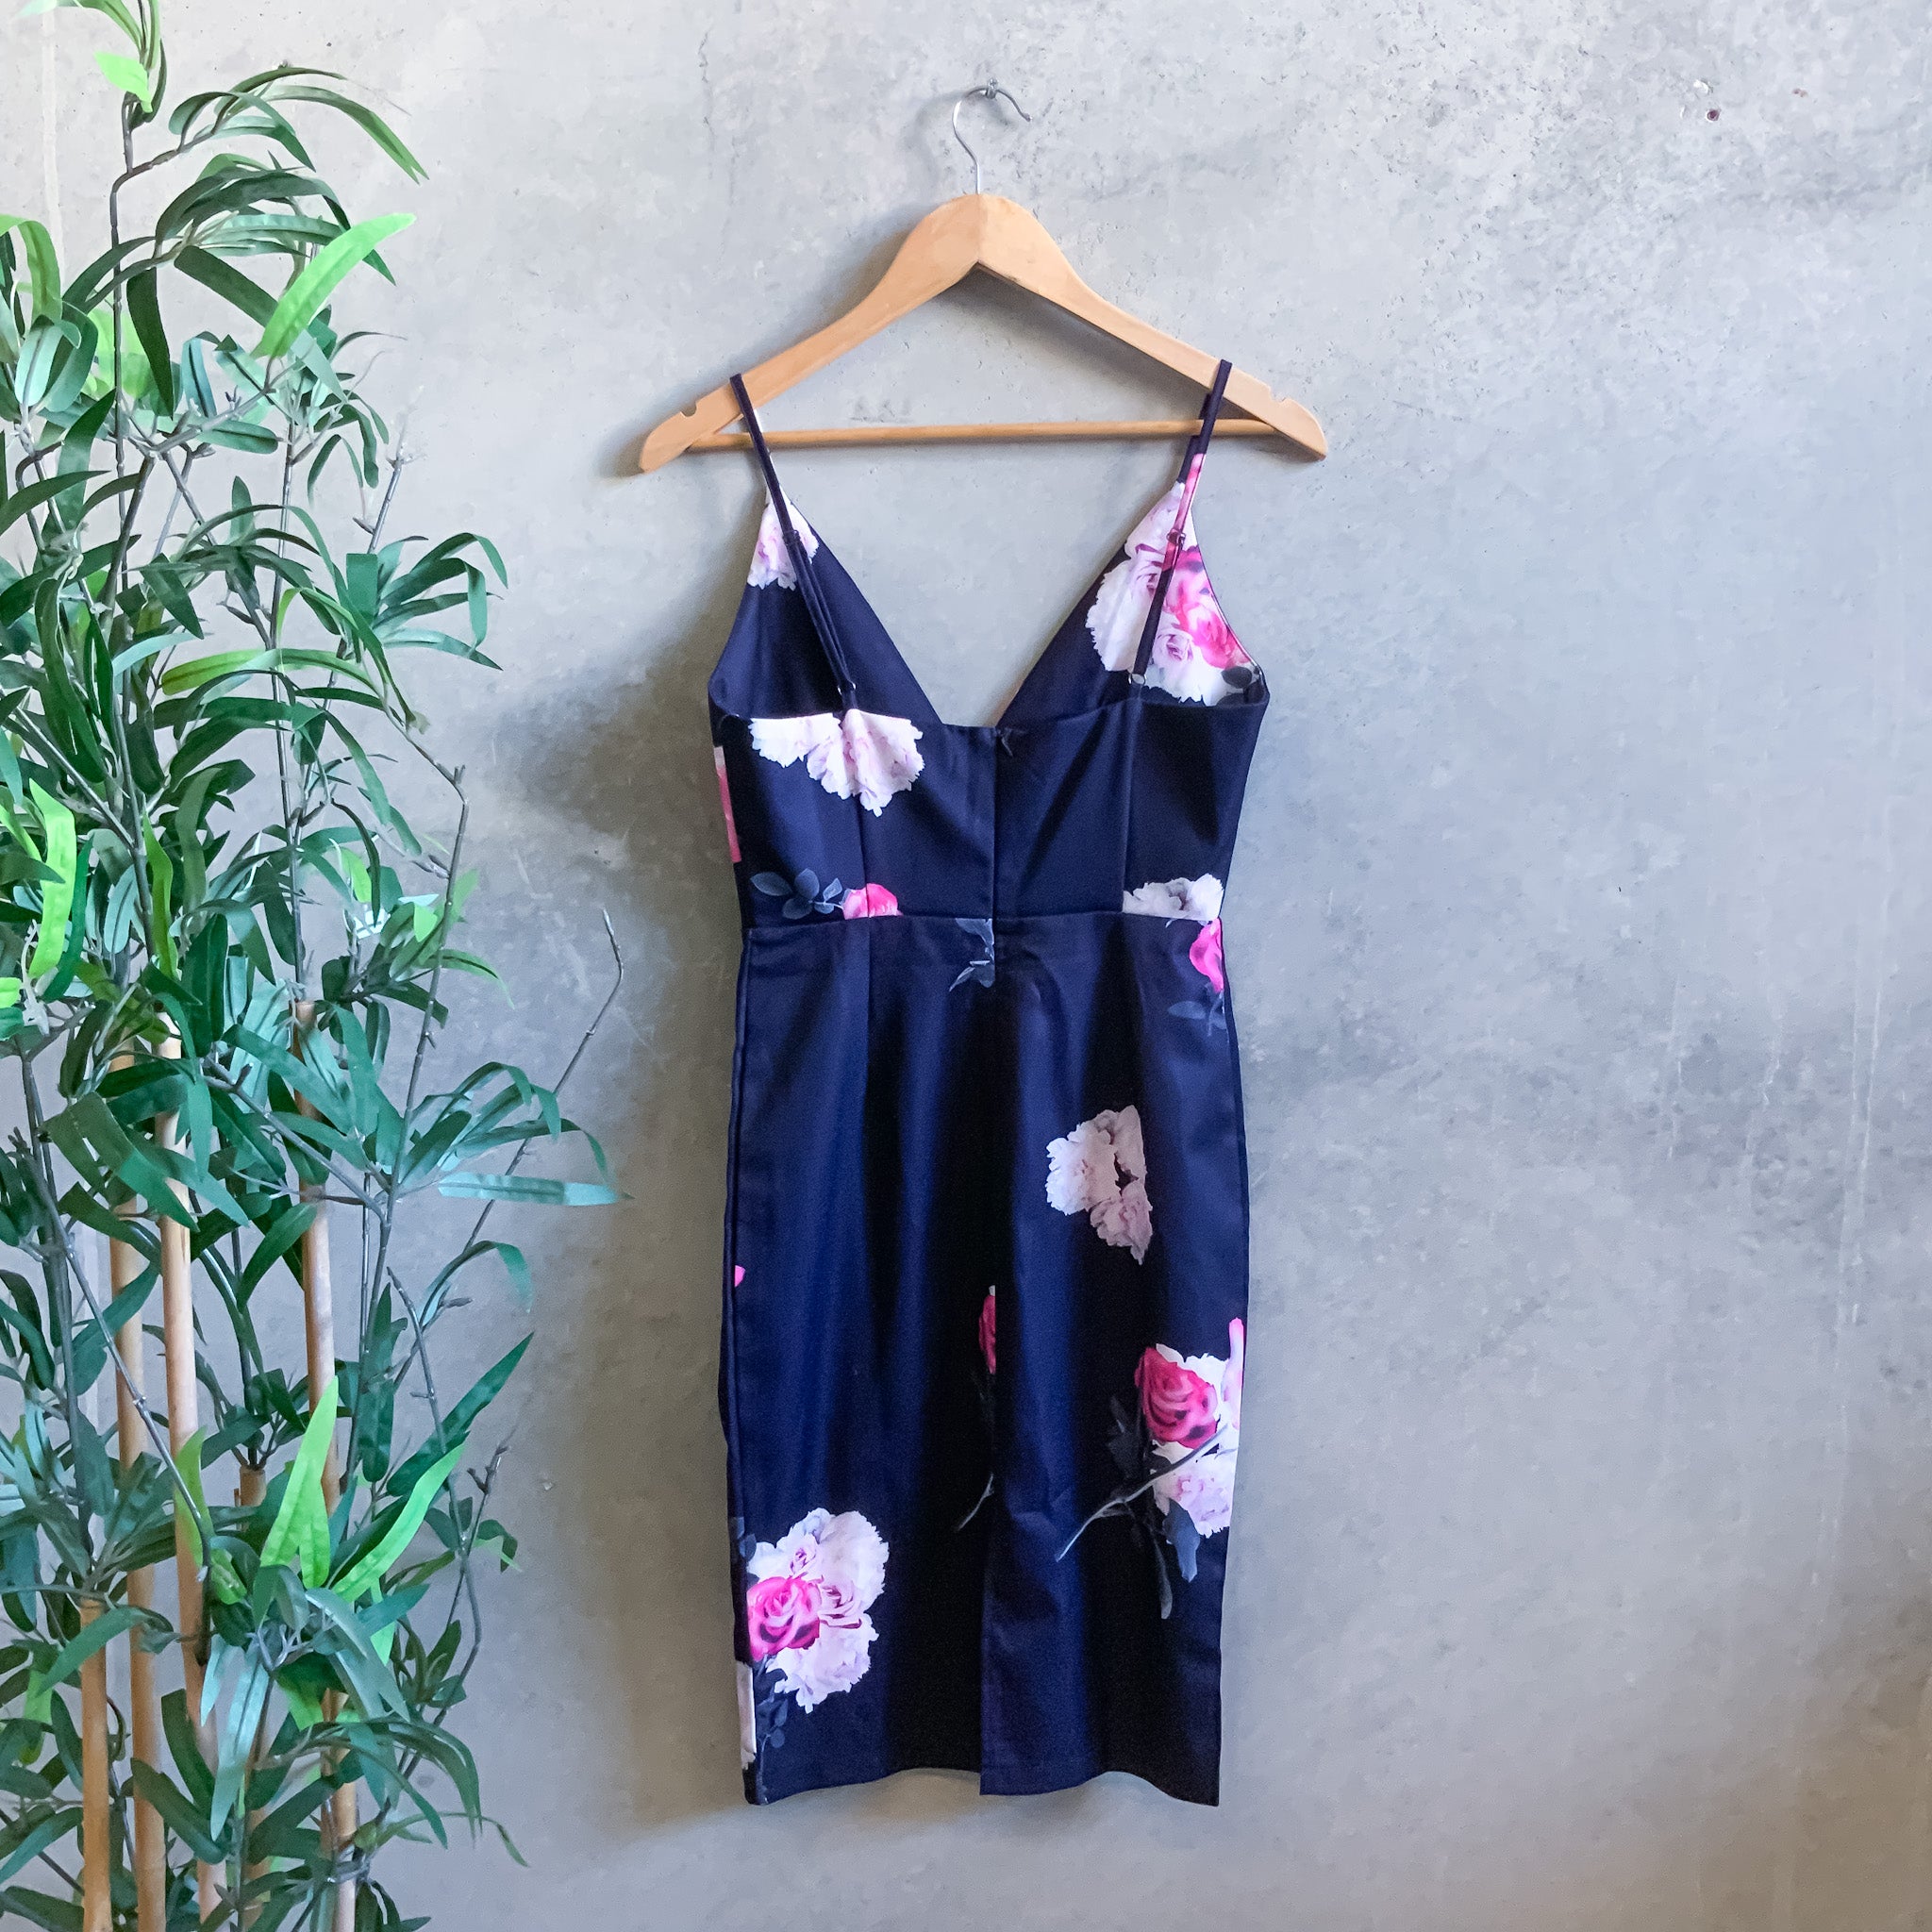 BNWT LUVALOT Navy Blue Floral Strappy Pencil Cocktail/Party/Club Dress - Size 8